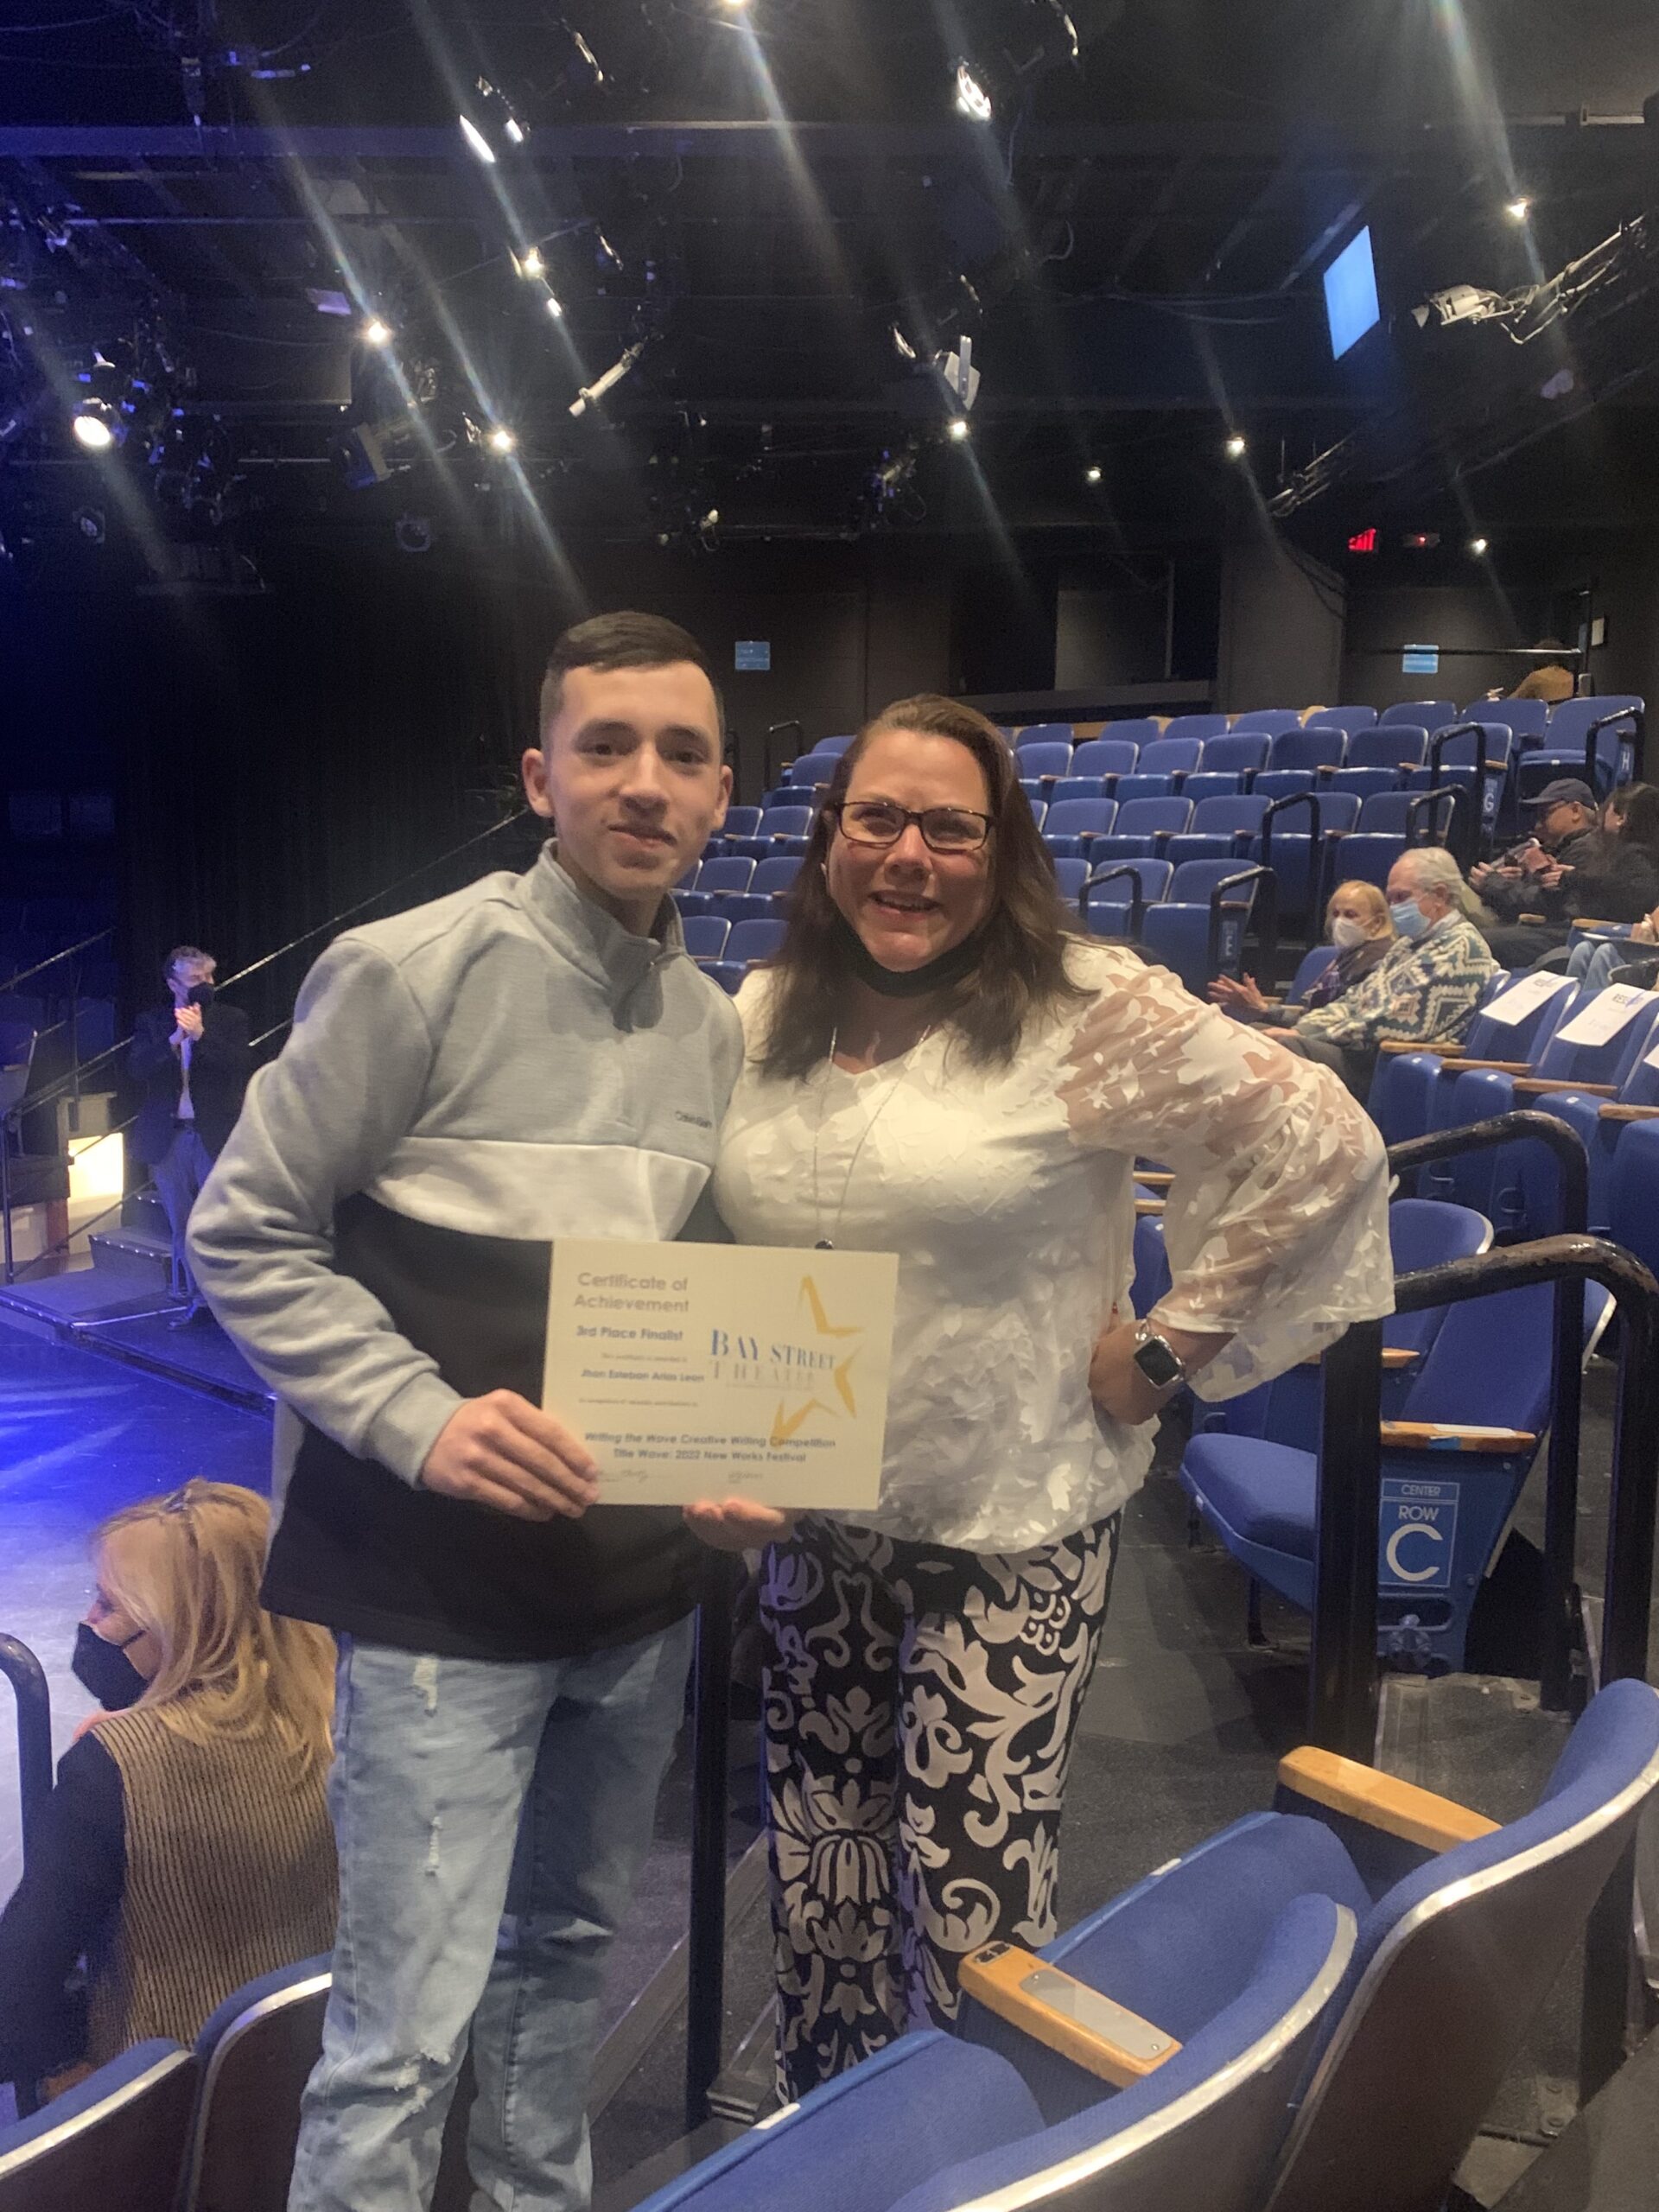 Hampton Bays High School student Jhon Esteban Arias Leon took third place in the Suffolk County “Writing the Wave” creative writing competition, sponsored by Bay Street Theater. With him is his teacher, Kathleen McEarlean. COURTESY HAMPTON BAYS SCHOOL DISTRICT